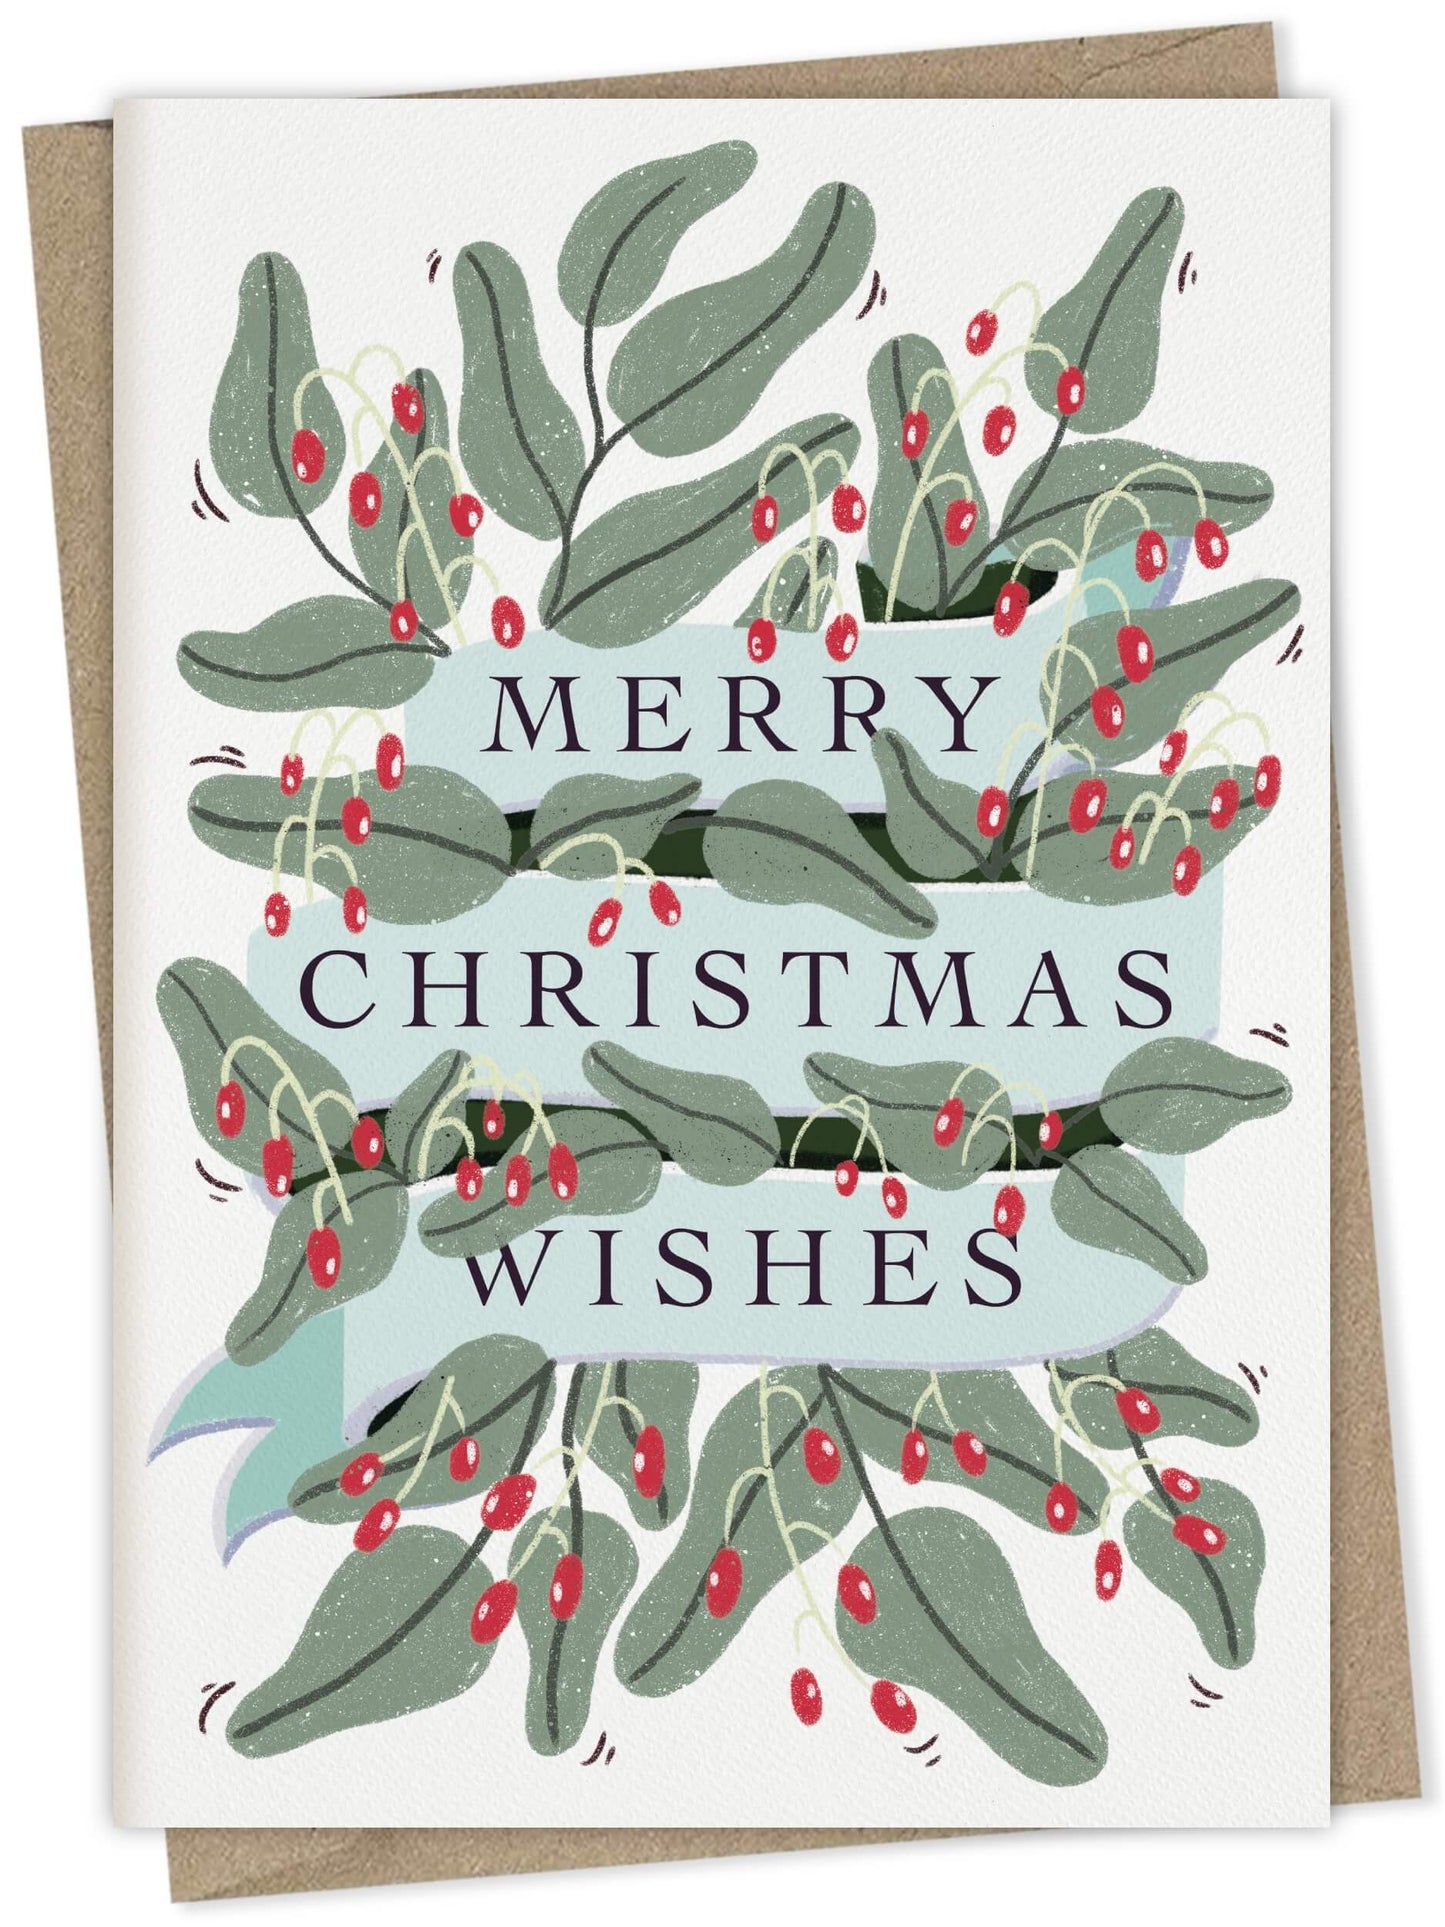 Merry Christmas Wishes – floral greeting card